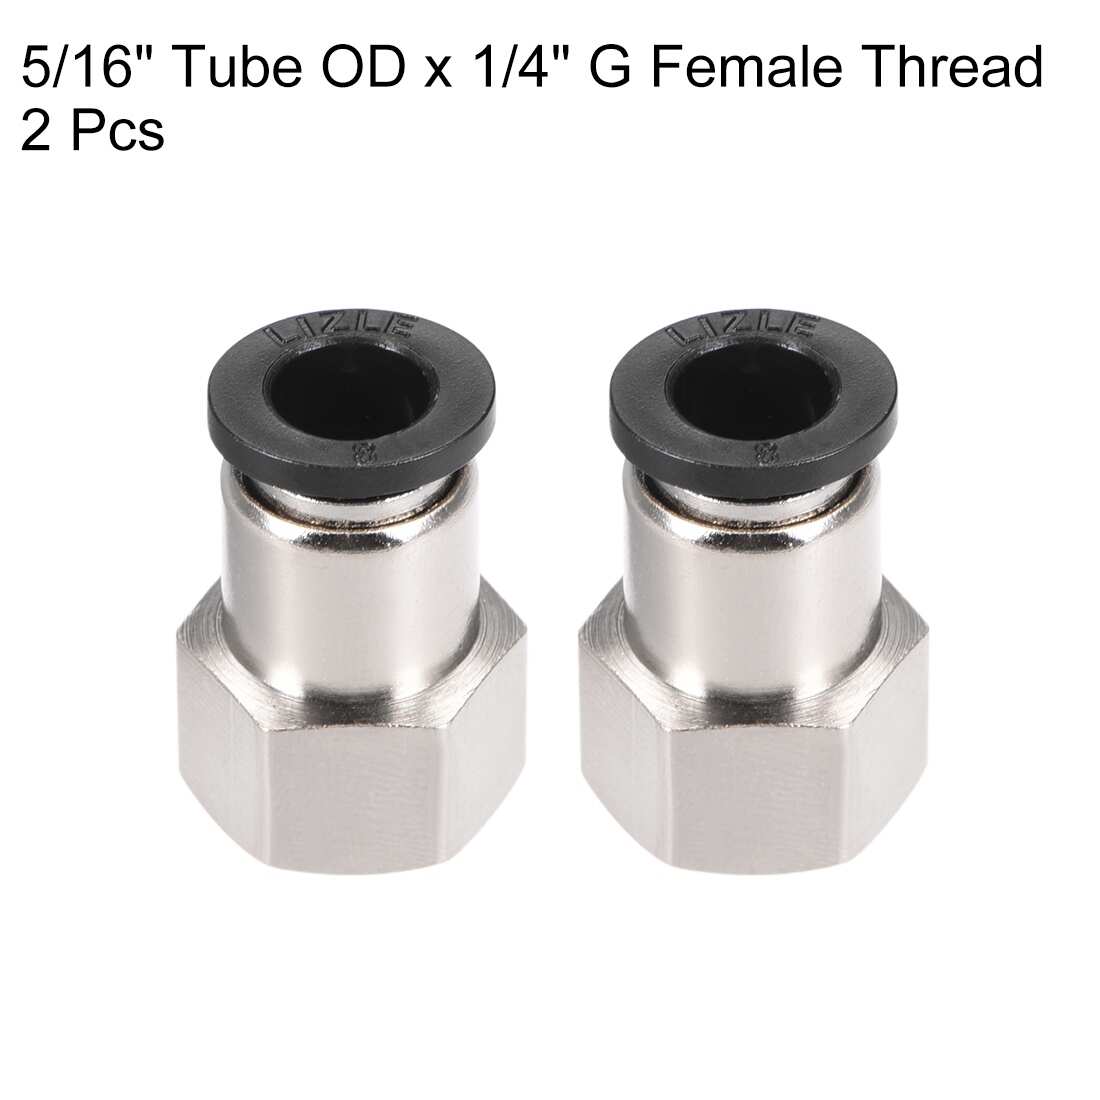 Push to Connect Tube Fitting Adapter 8mm OD x G1/4" Female 2pcs - Silver Tone,Black